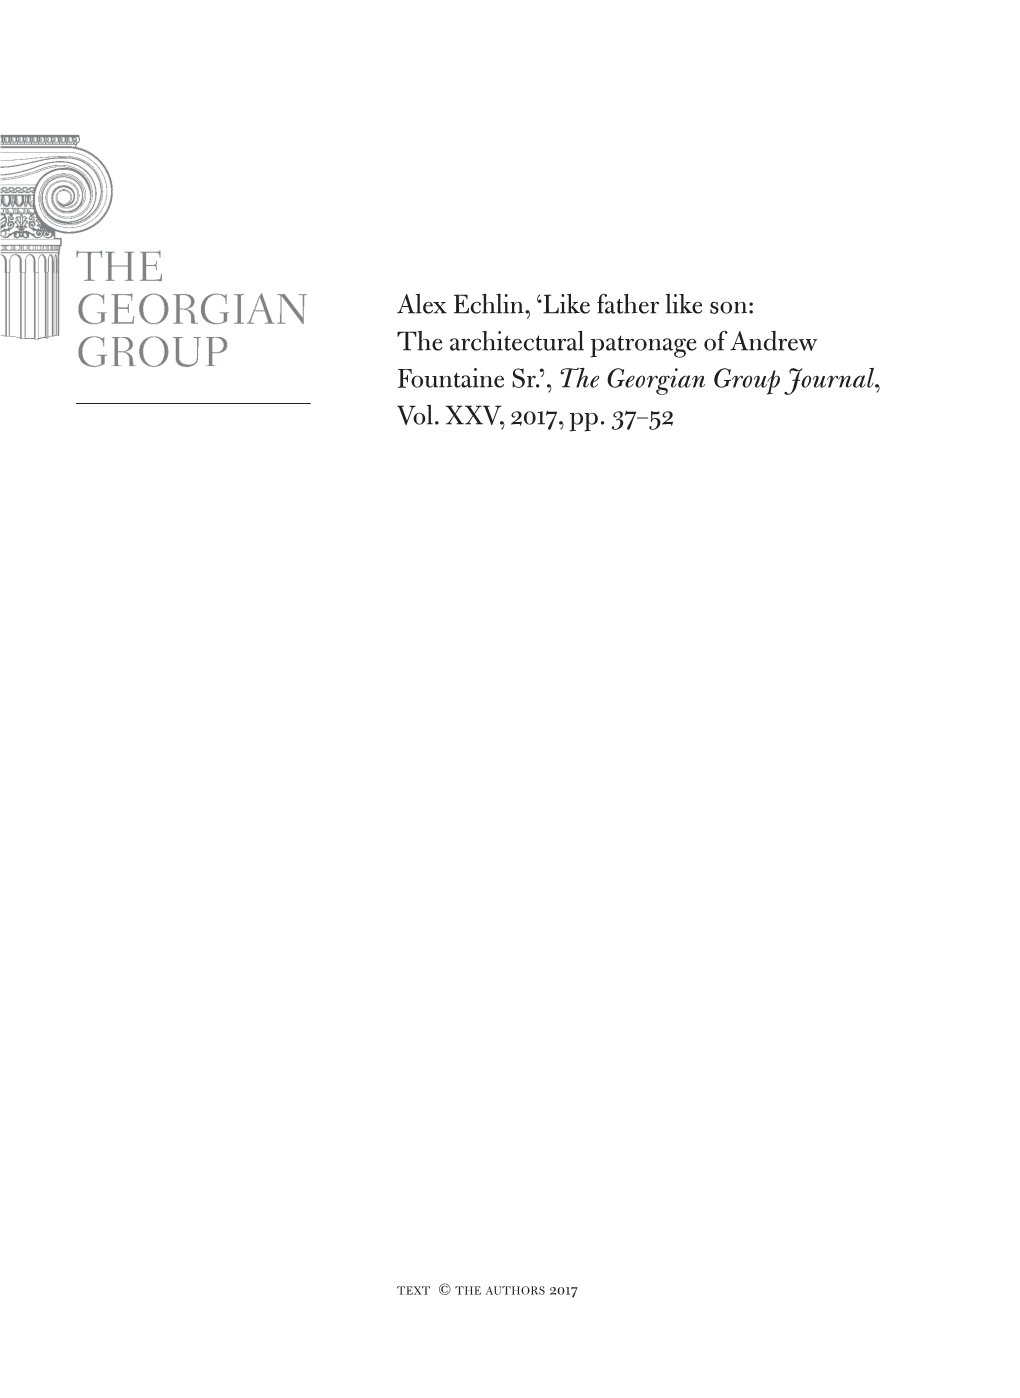 Alex Echlin, 'Like Father Like Son: the Architectural Patronage of Andrew Fountaine Sr.', the Georgian Group Journal, Vol. X